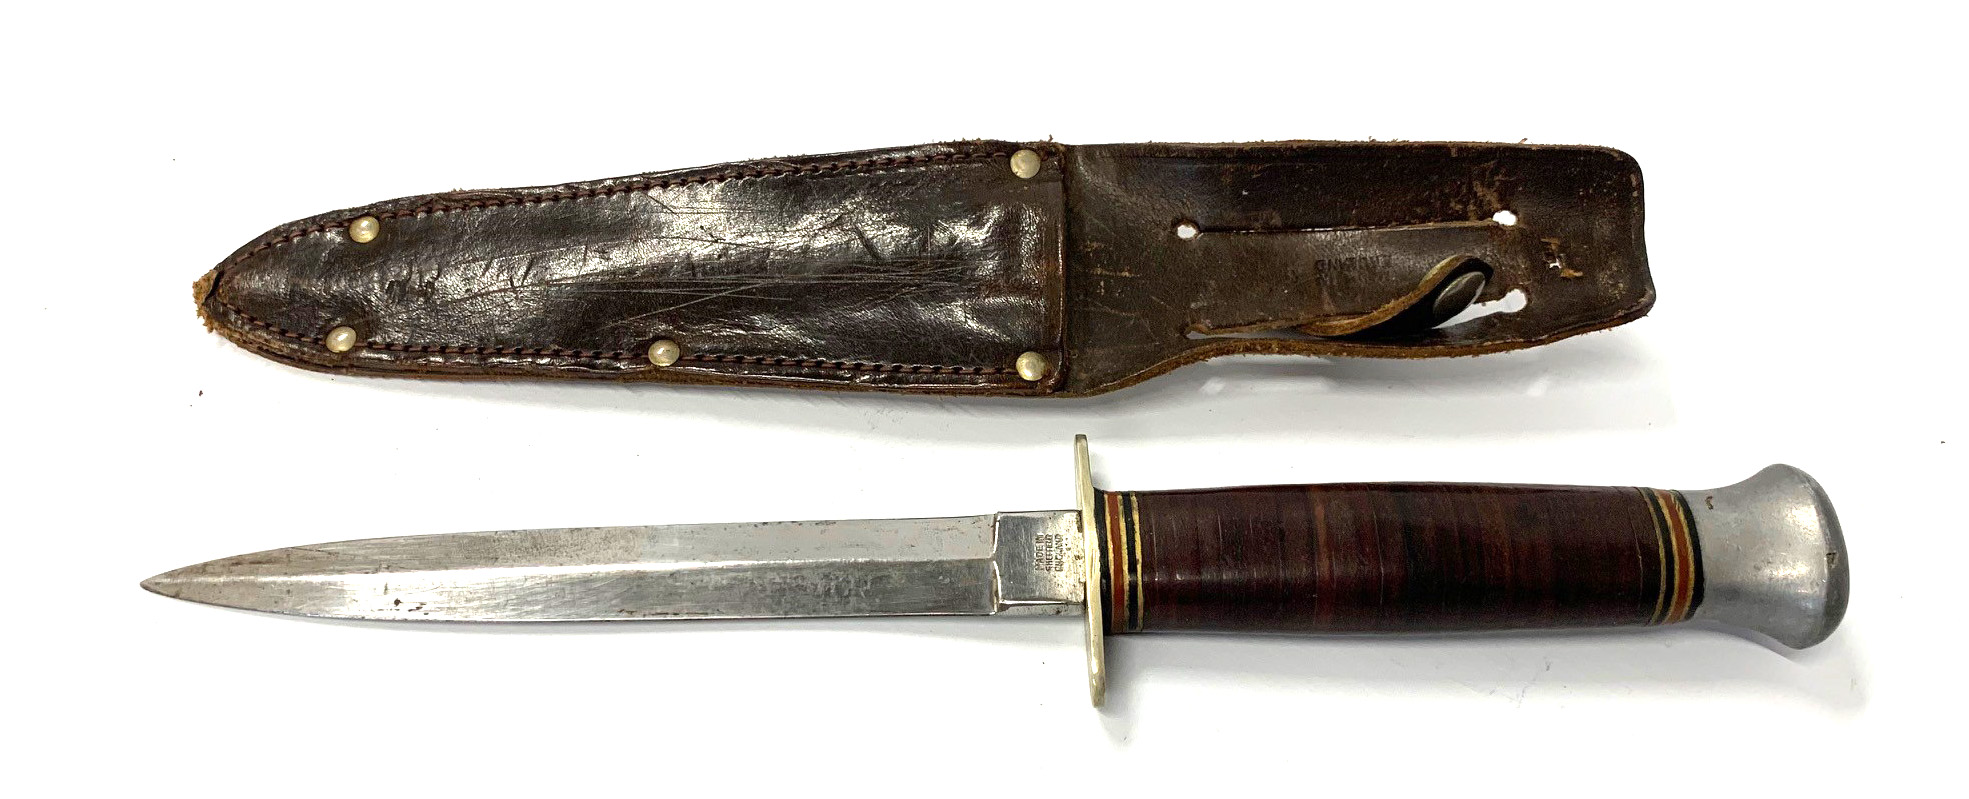 A 20TH CENTURY WILLIAM RODGERS DAGGER Inscribed to blade 'I CUT MY WAY - WILLIAM RODGERS, SHEFFIELD,